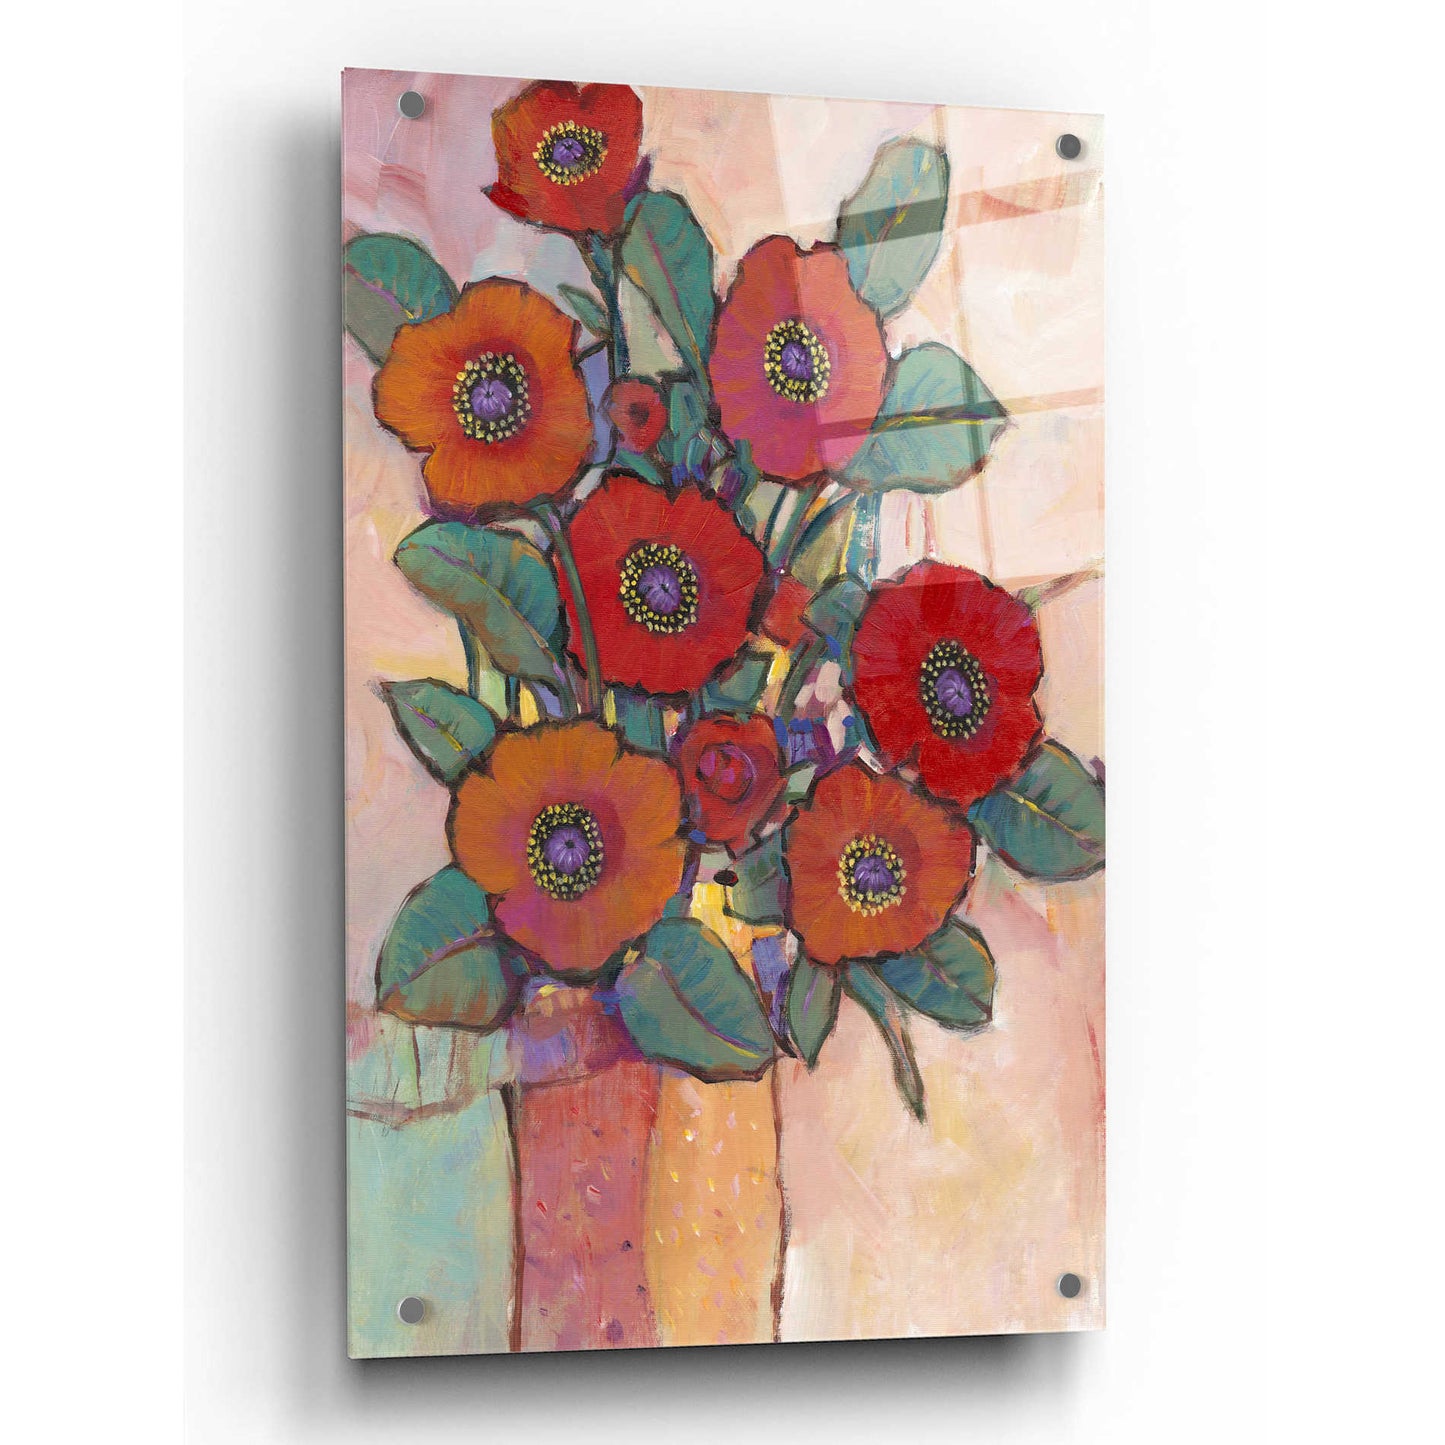 Epic Art 'Poppies in a Vase I' by Tim O'Toole, Acrylic Glass Wall Art,24x36